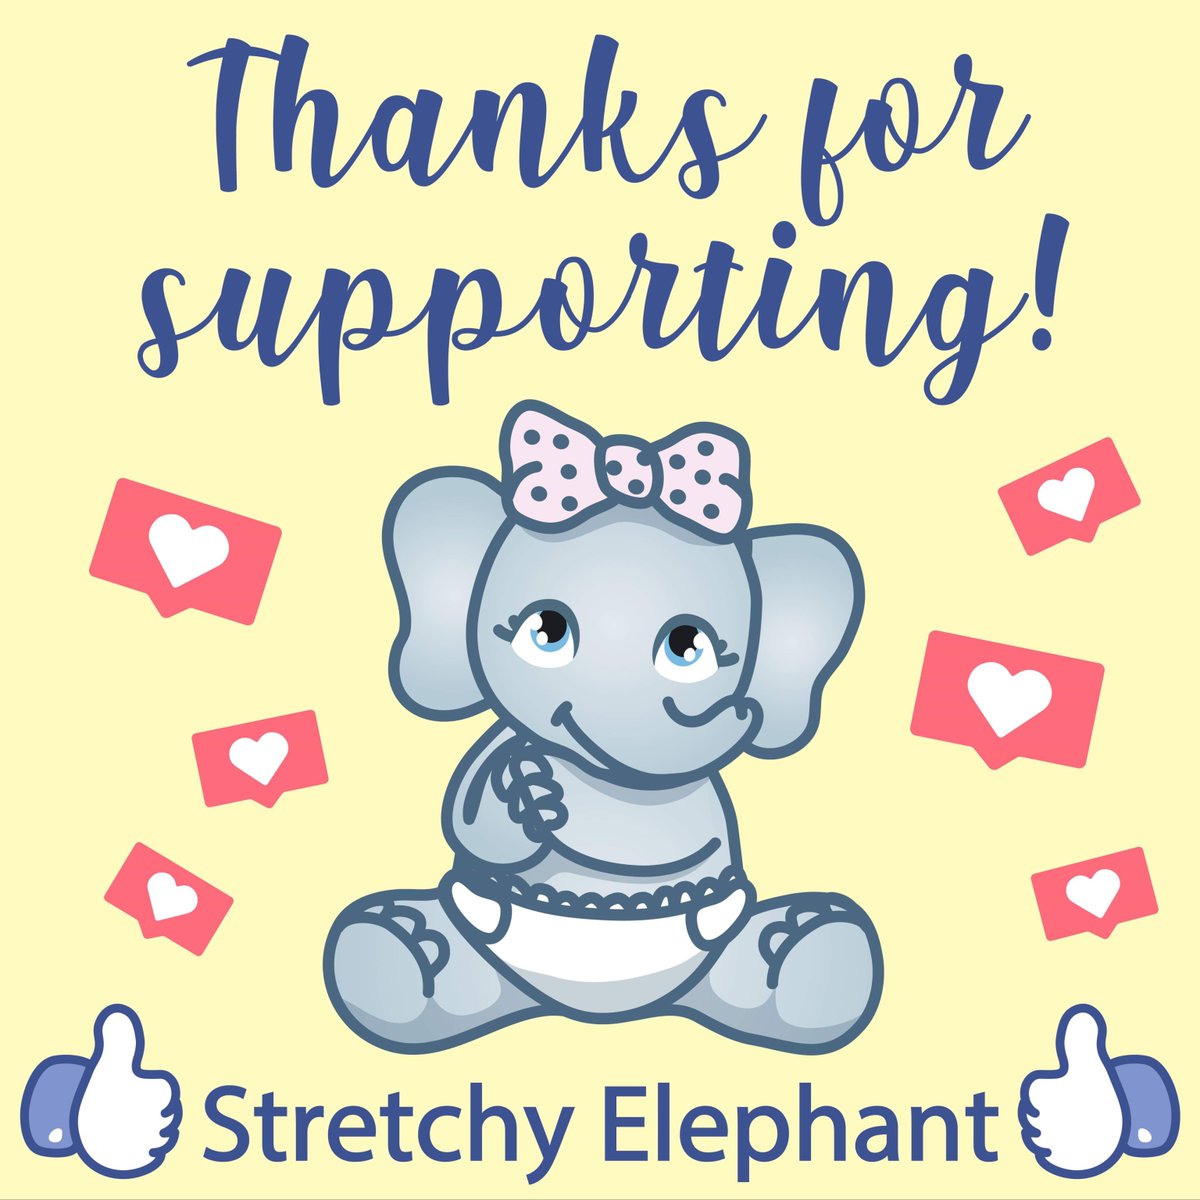 Thanks for your support! Please share Stretchy with your friends...